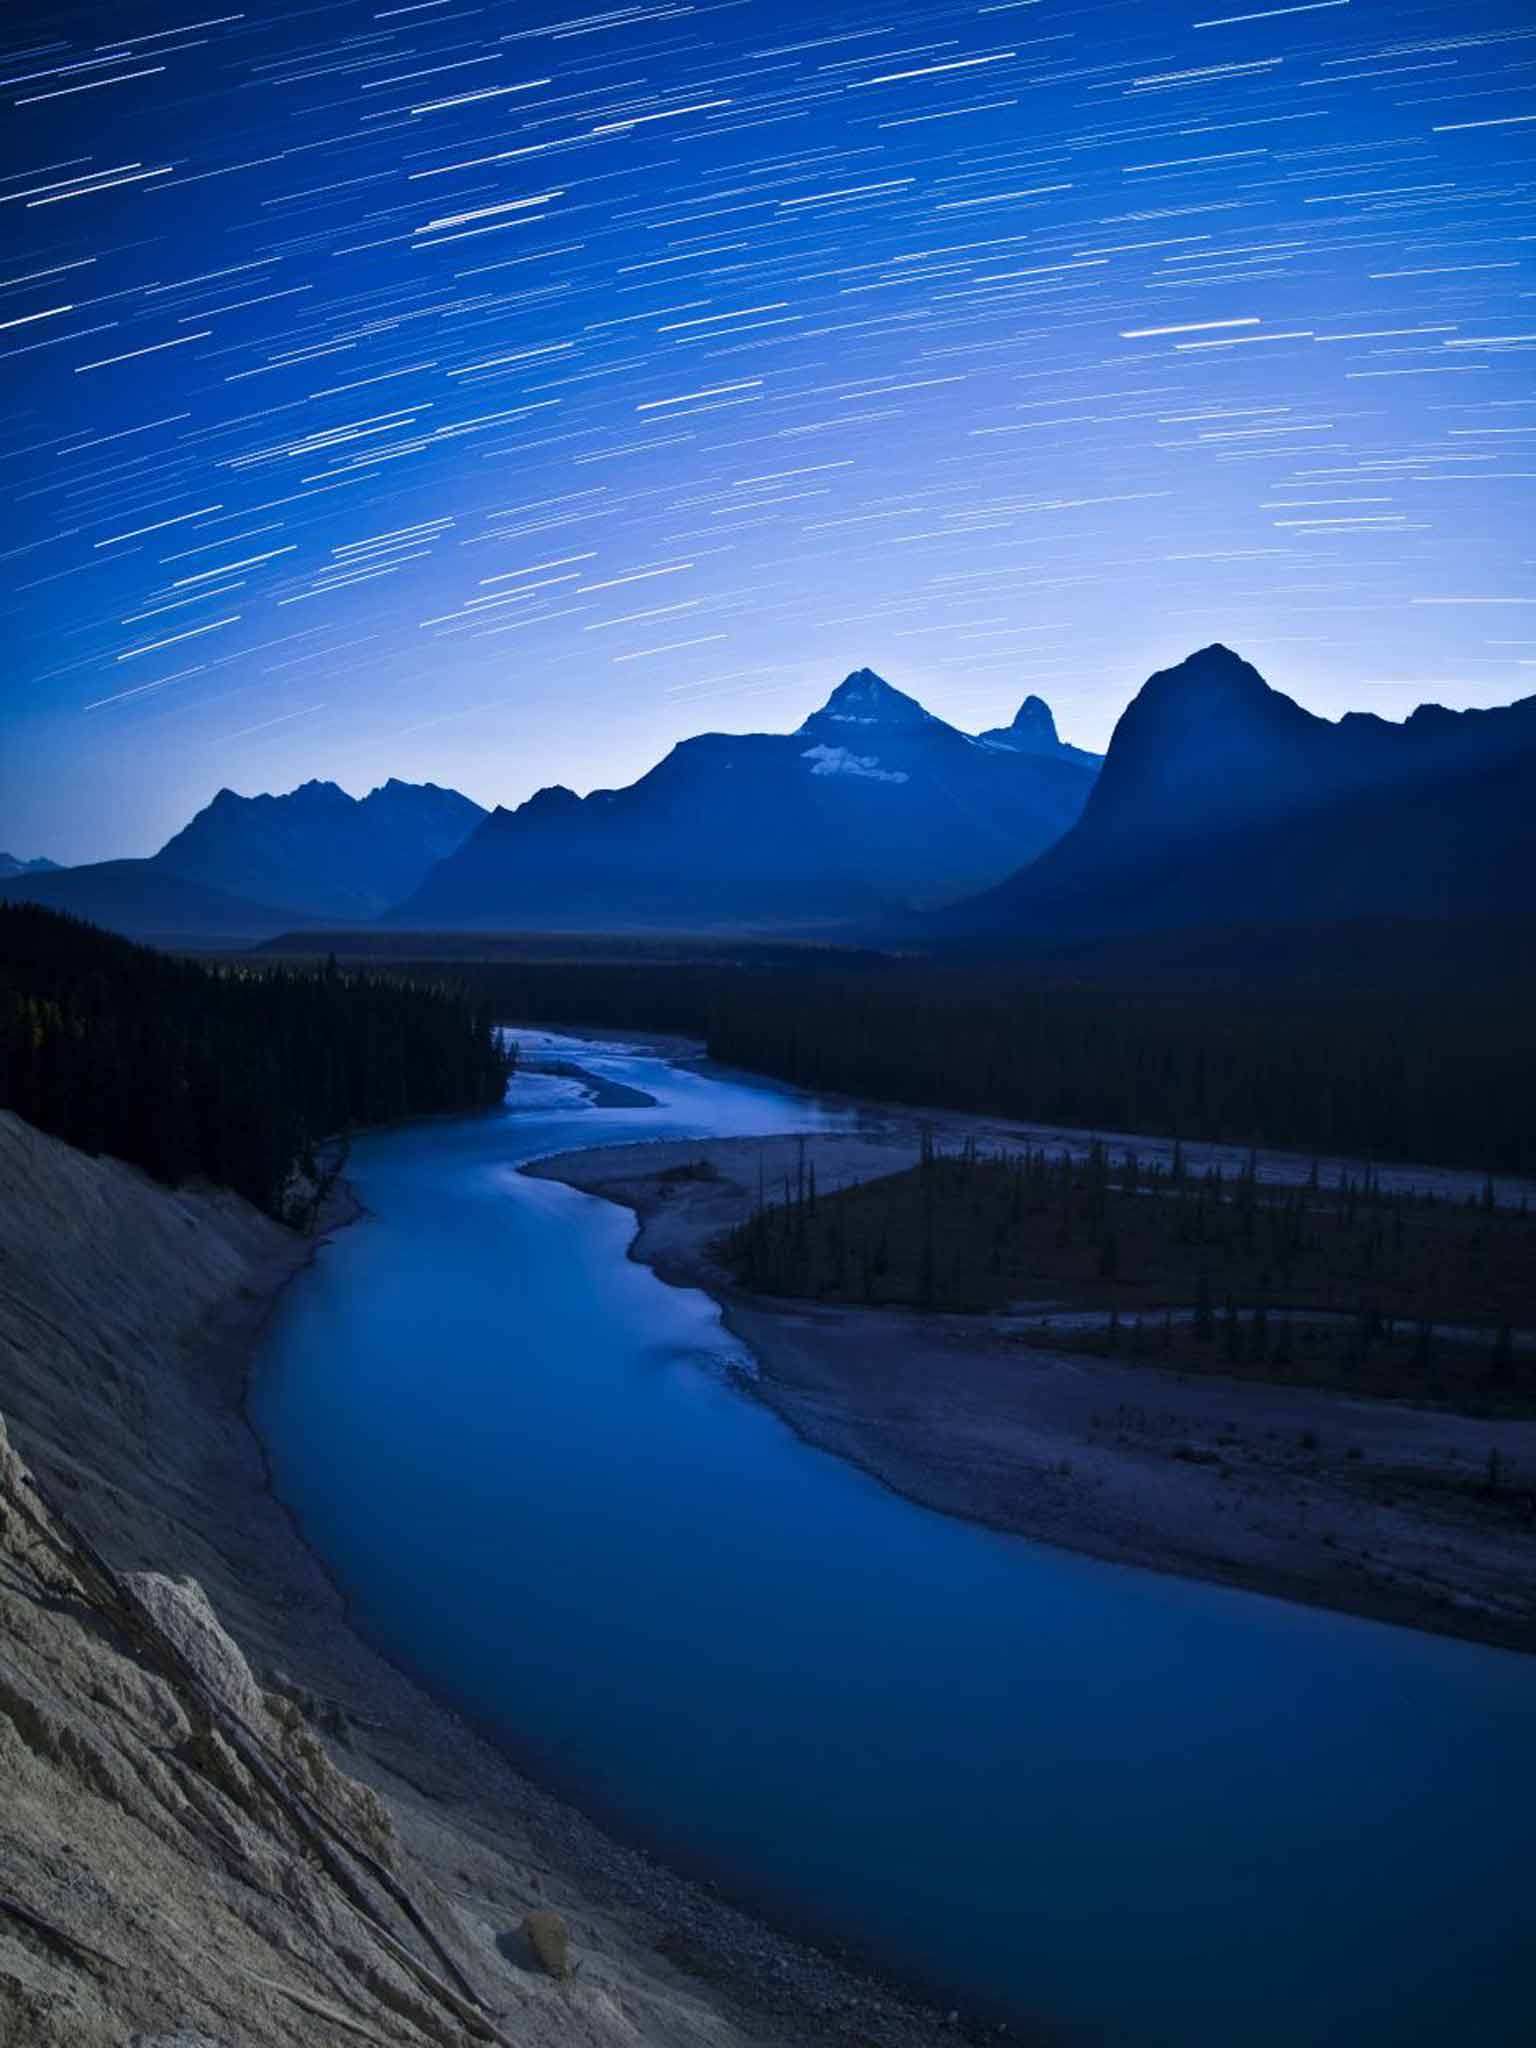 Starstruck: night sky at the Athabasca Valley in Canada's Jasper National Park